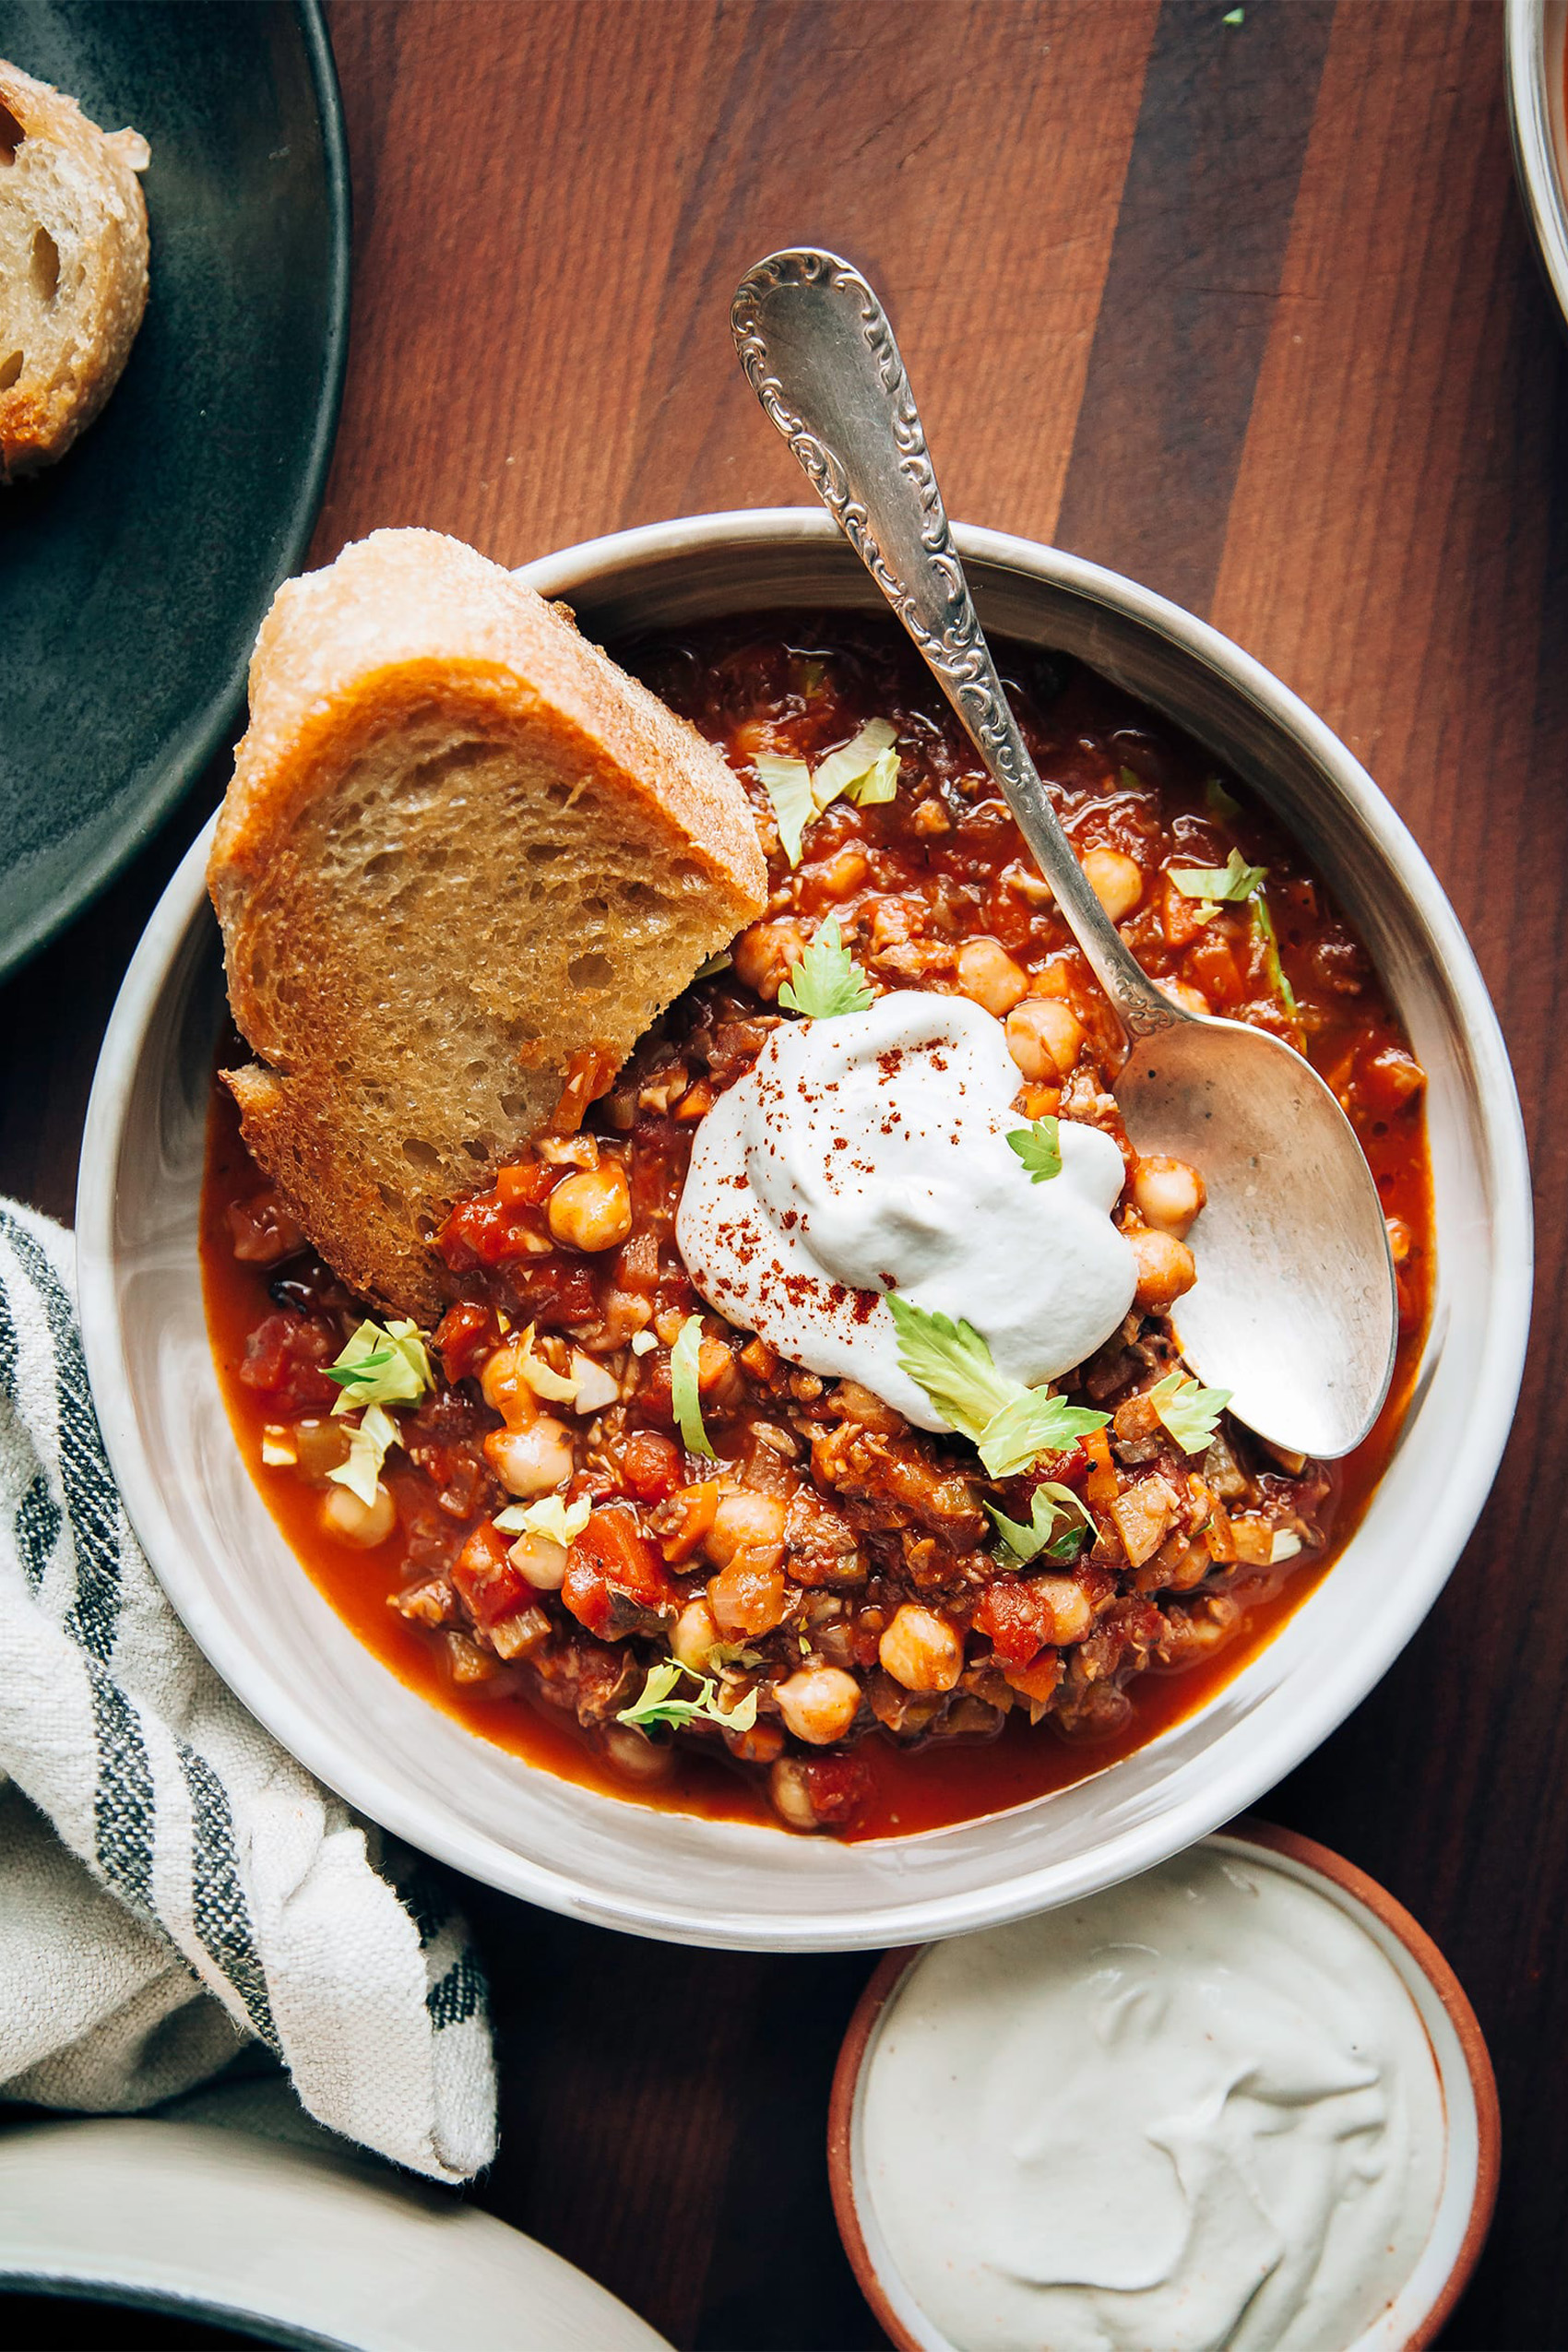 a bowl of vegetarian chili served with a slice of bread and a dollop of sour cream